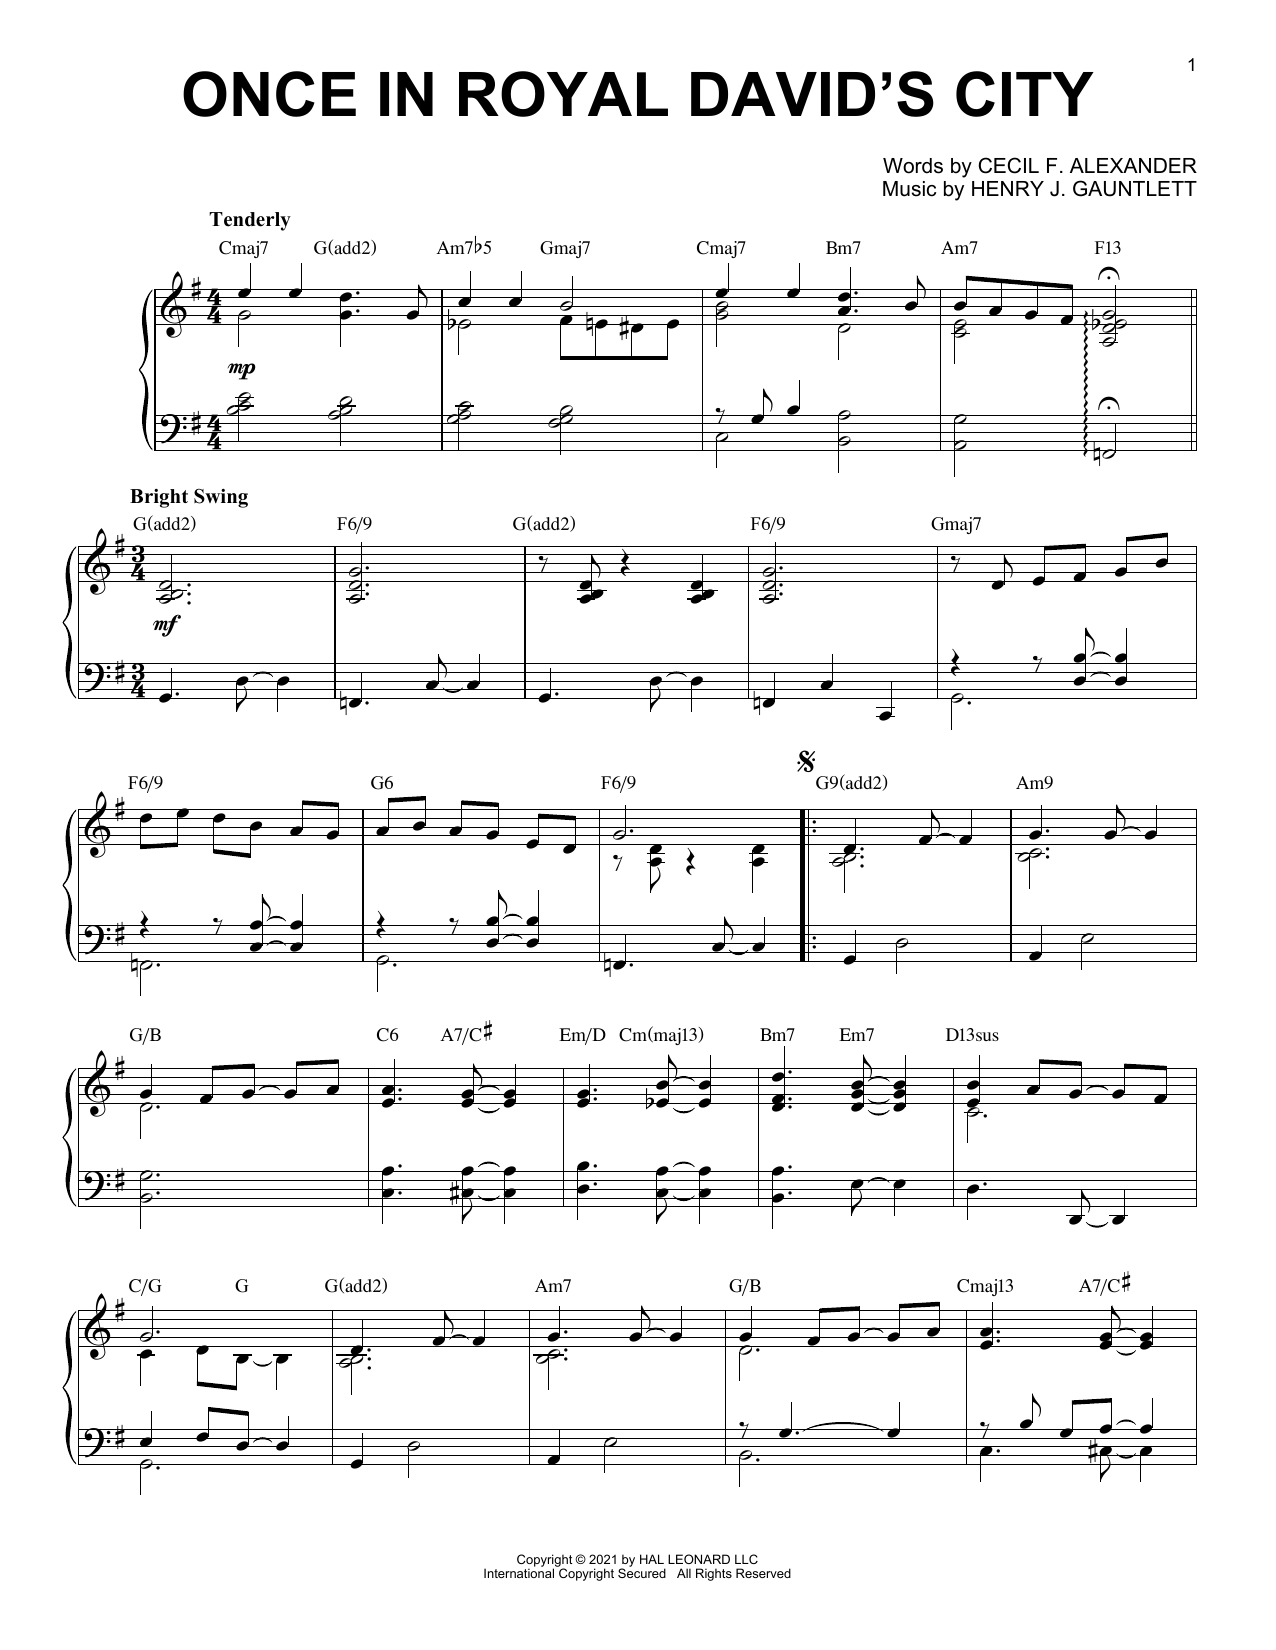 Download Cecil F. Alexander Once In Royal David's City [Jazz versio Sheet Music